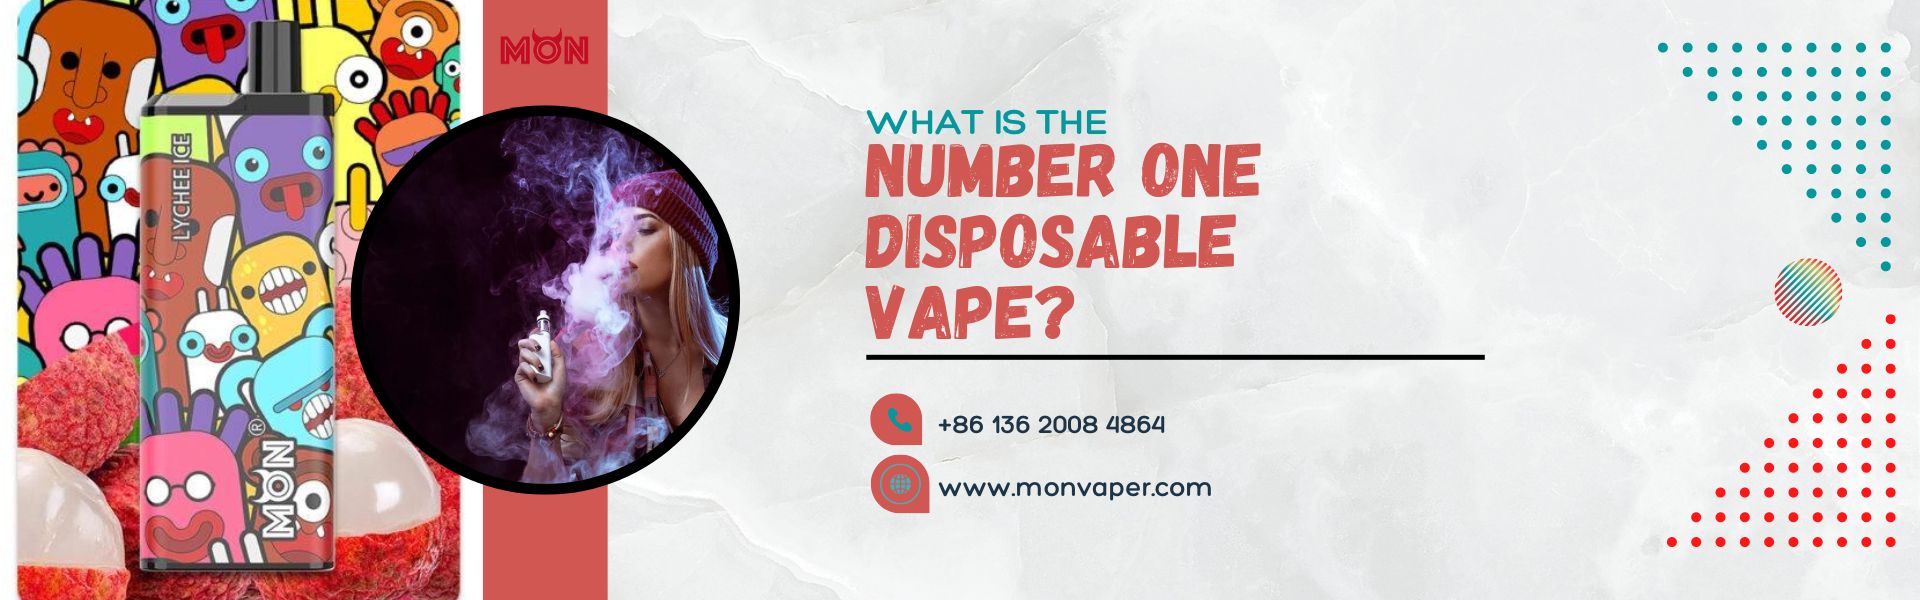 number 1 disposable vape